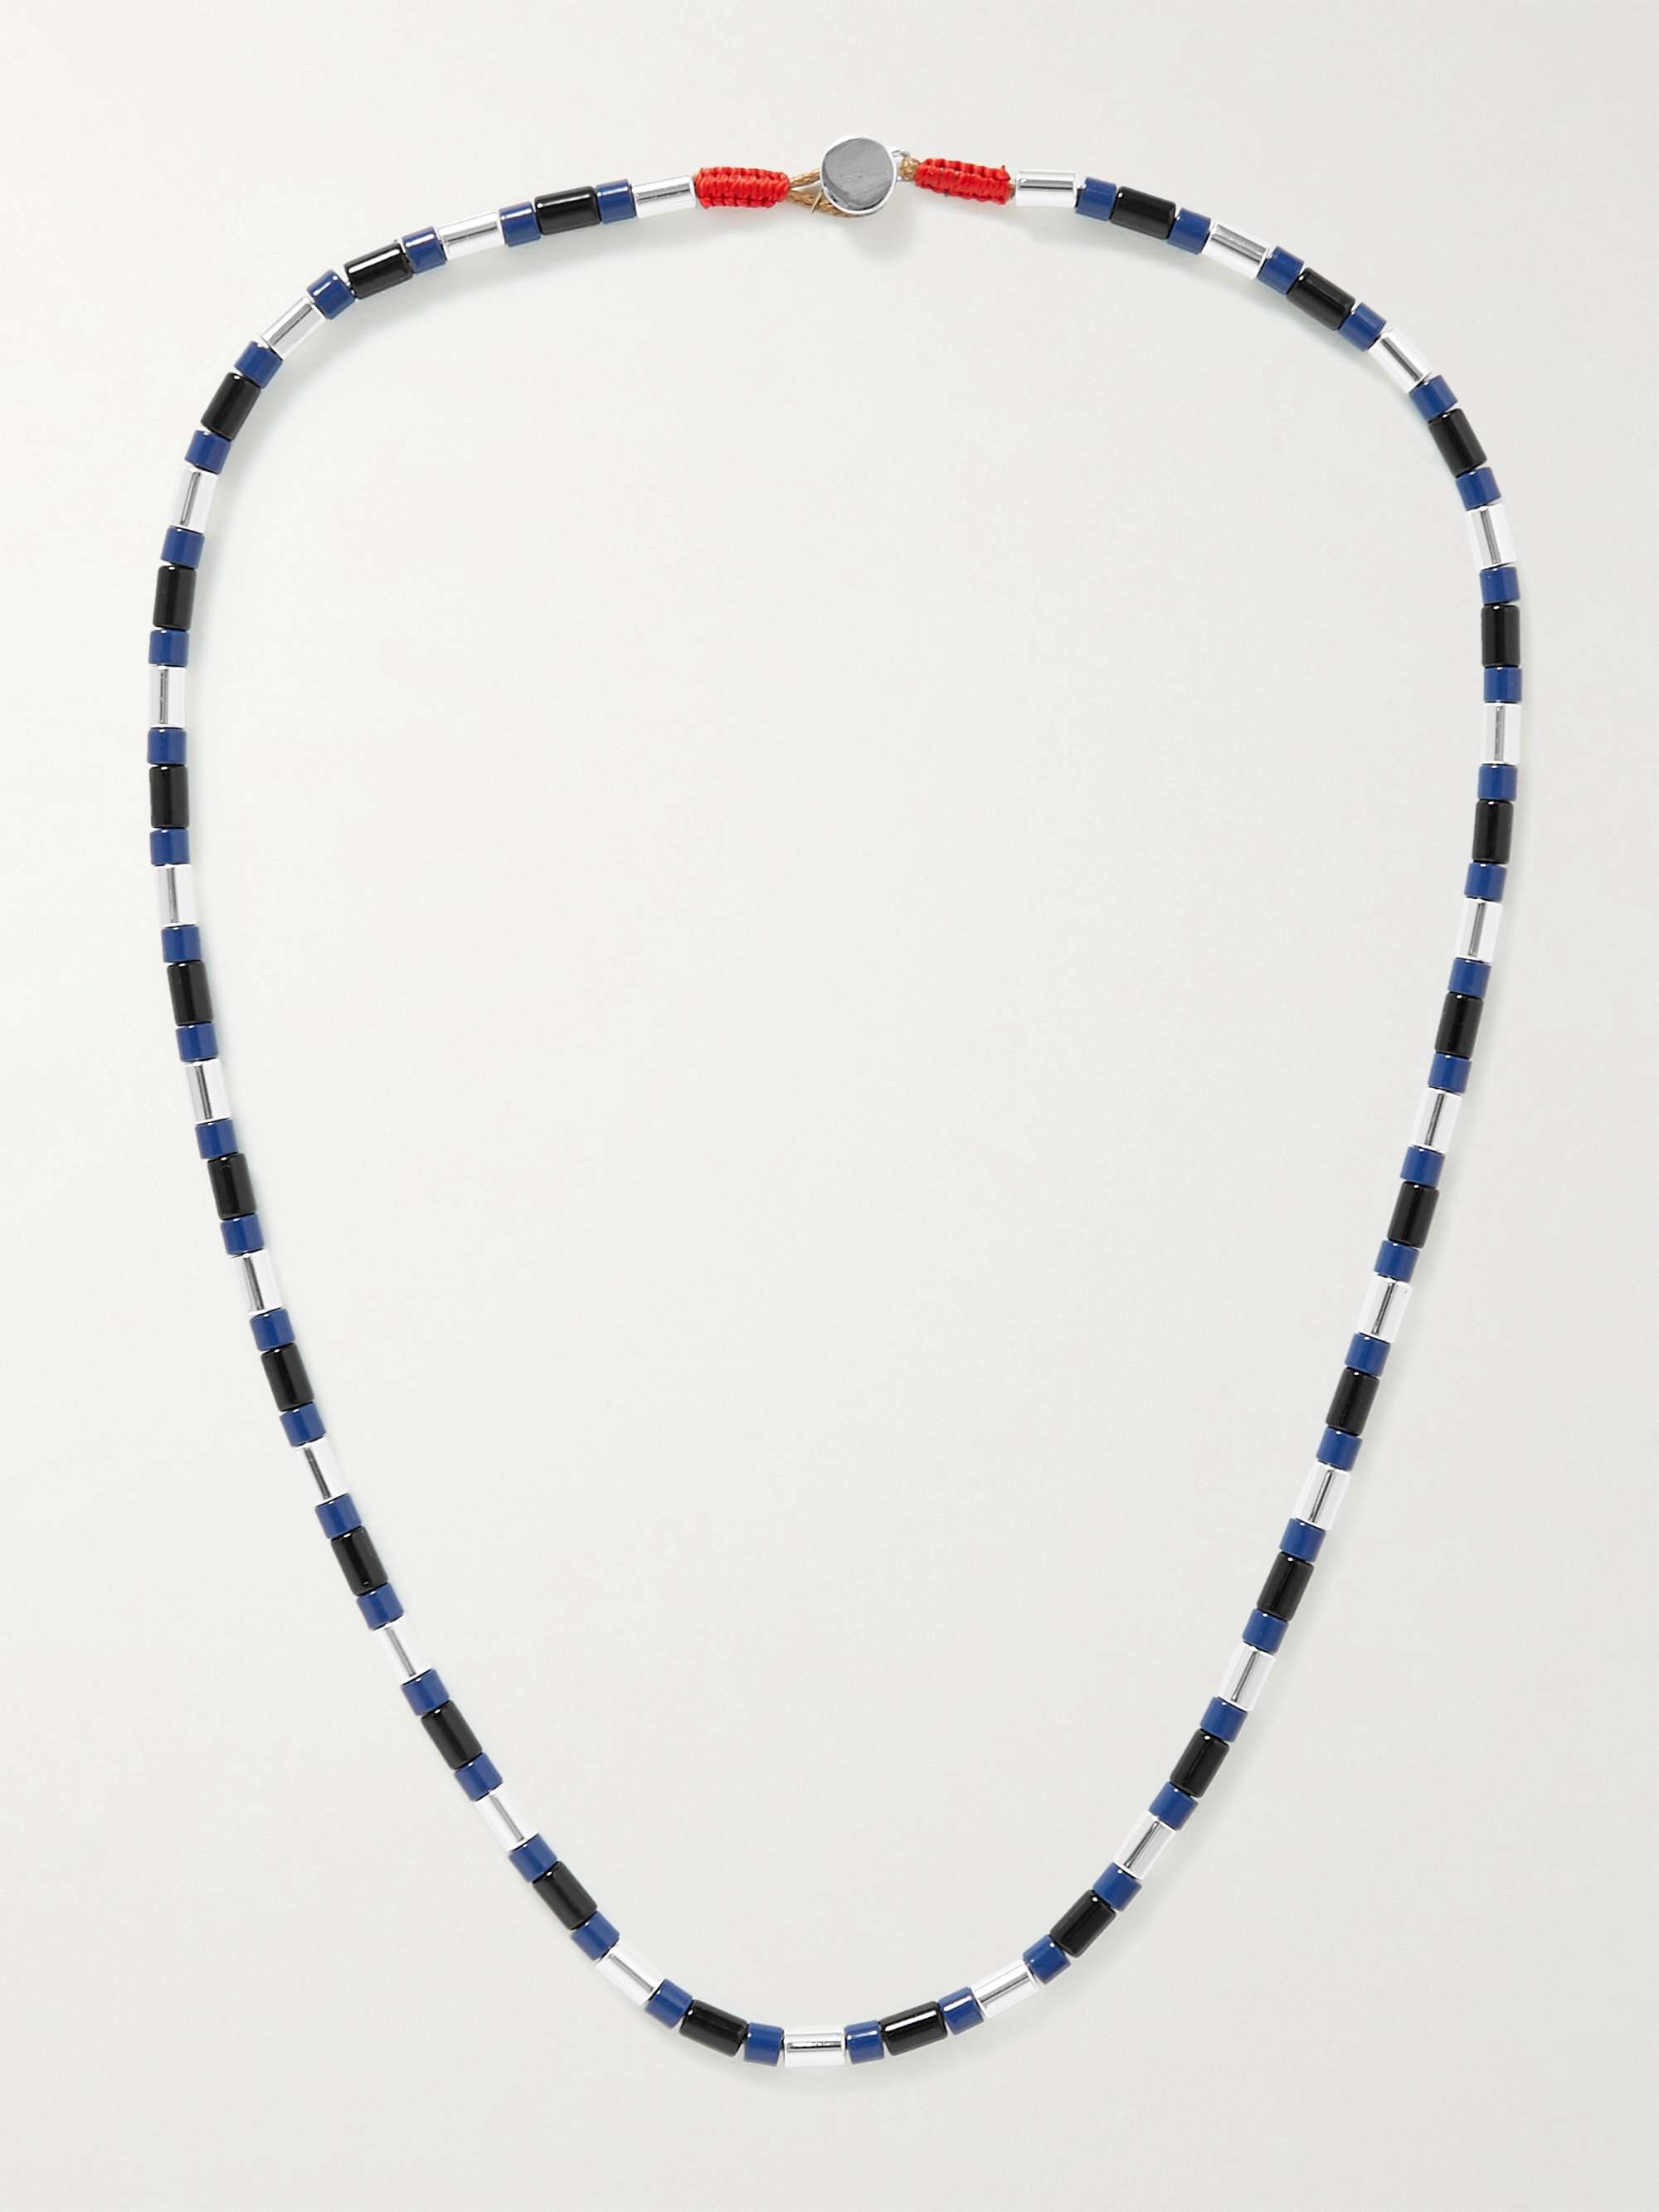 ROXANNE ASSOULIN Well Suited Enamel and Silver-Tone Necklace